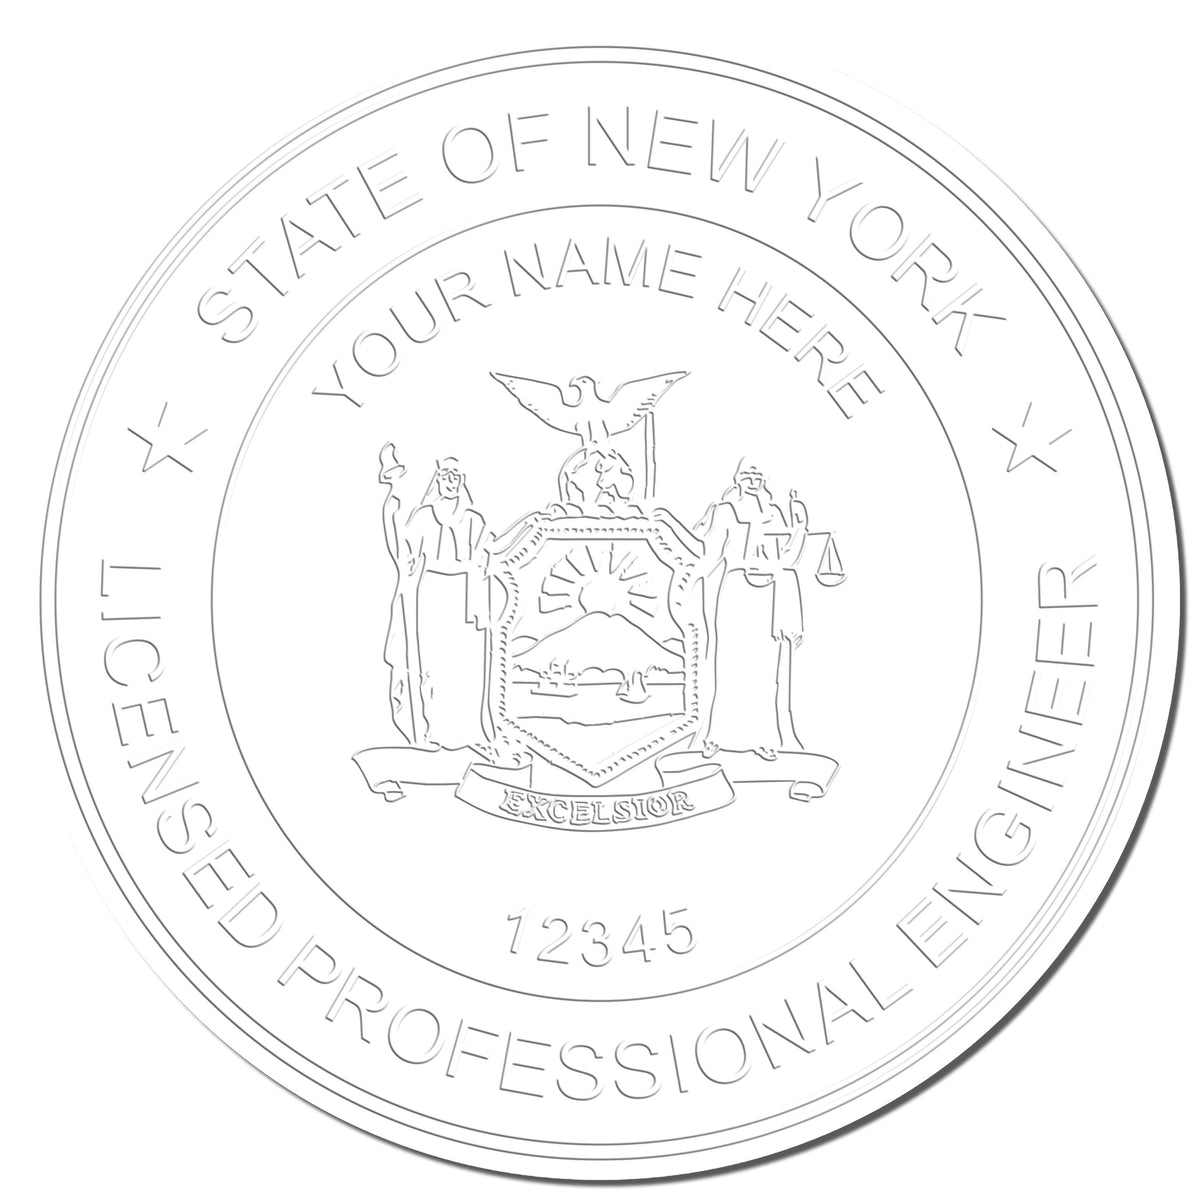 The Long Reach New York PE Seal stamp impression comes to life with a crisp, detailed photo on paper - showcasing true professional quality.